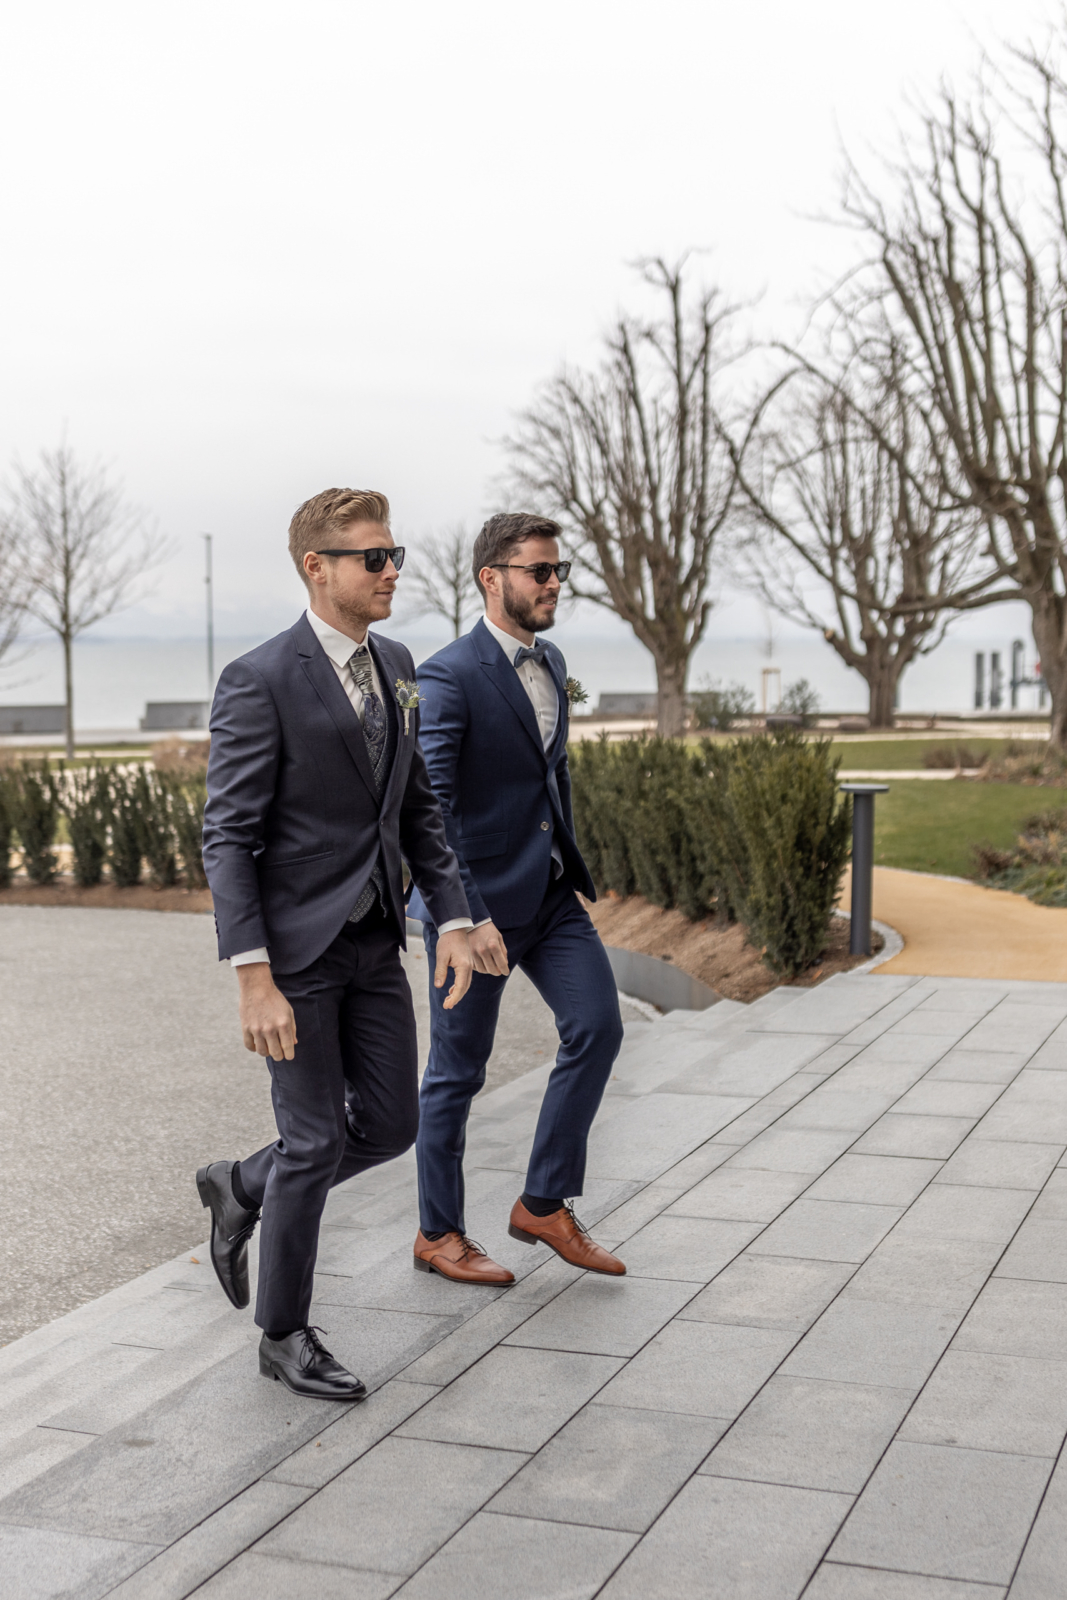 groom and best man arrive at the wedding location in Austria